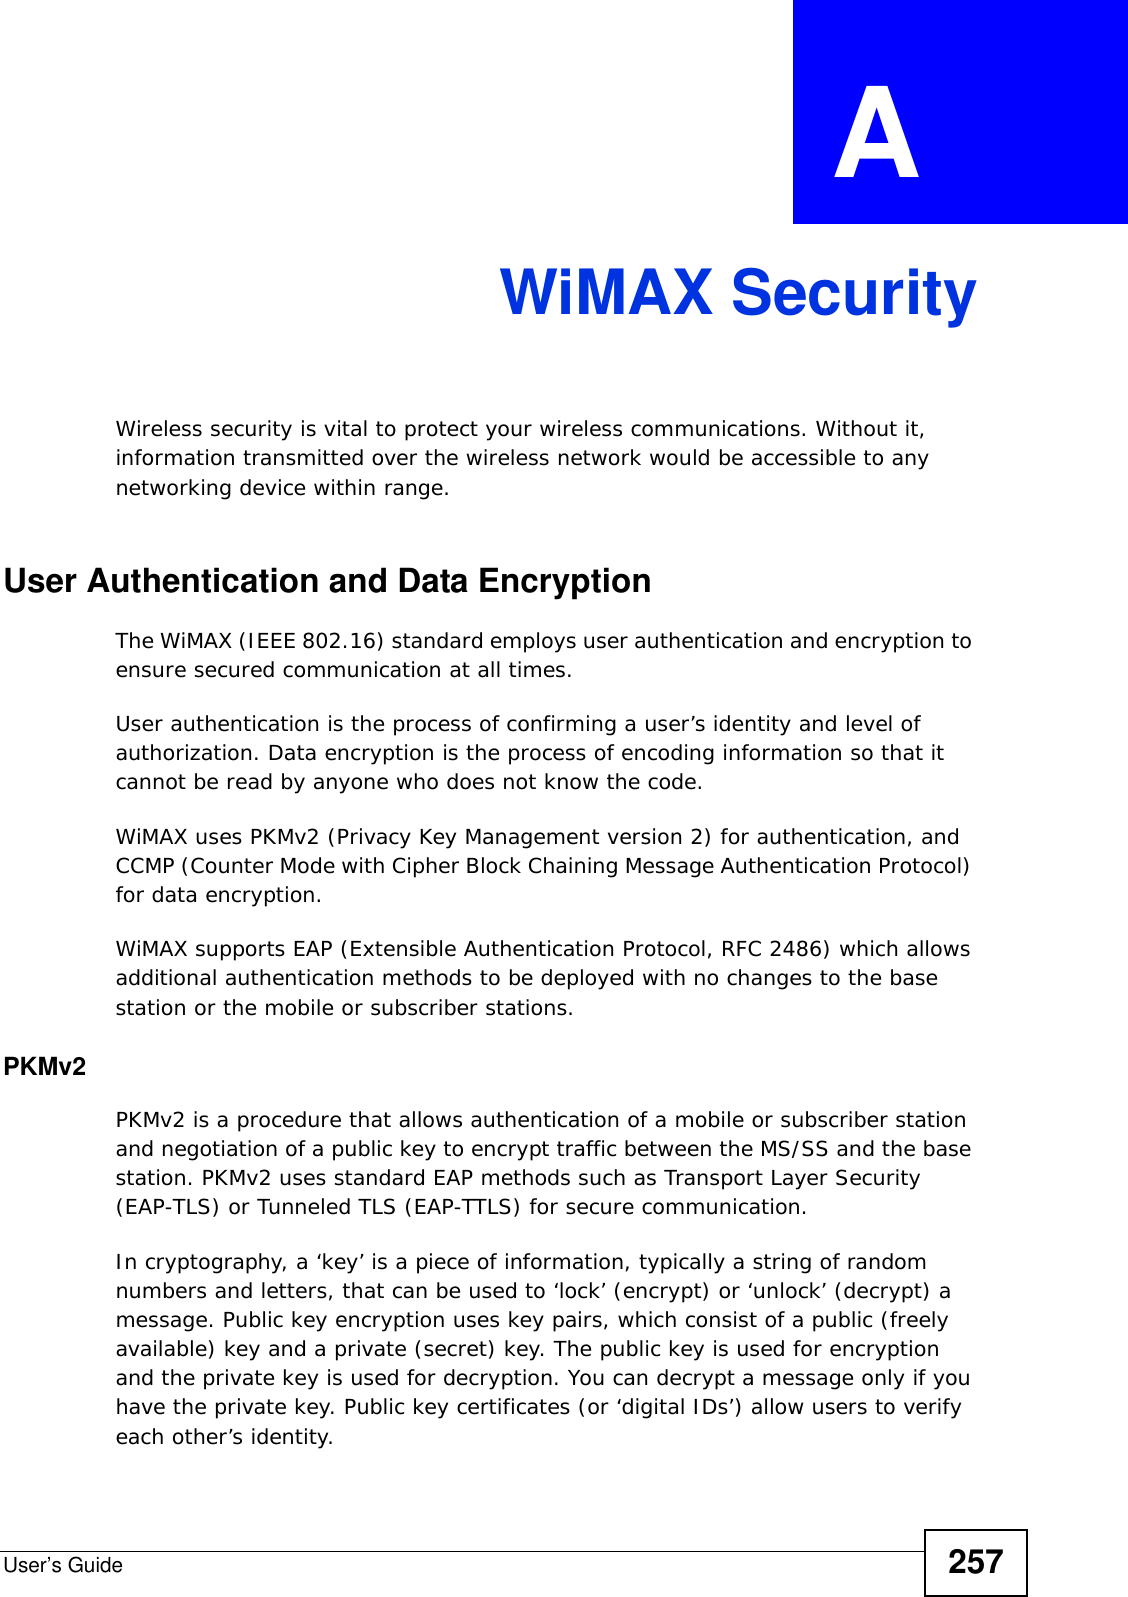 User’s Guide 257APPENDIX  A WiMAX SecurityWireless security is vital to protect your wireless communications. Without it, information transmitted over the wireless network would be accessible to any networking device within range.User Authentication and Data EncryptionThe WiMAX (IEEE 802.16) standard employs user authentication and encryption to ensure secured communication at all times.User authentication is the process of confirming a user’s identity and level of authorization. Data encryption is the process of encoding information so that it cannot be read by anyone who does not know the code. WiMAX uses PKMv2 (Privacy Key Management version 2) for authentication, and CCMP (Counter Mode with Cipher Block Chaining Message Authentication Protocol) for data encryption. WiMAX supports EAP (Extensible Authentication Protocol, RFC 2486) which allows additional authentication methods to be deployed with no changes to the base station or the mobile or subscriber stations.PKMv2PKMv2 is a procedure that allows authentication of a mobile or subscriber station and negotiation of a public key to encrypt traffic between the MS/SS and the base station. PKMv2 uses standard EAP methods such as Transport Layer Security (EAP-TLS) or Tunneled TLS (EAP-TTLS) for secure communication. In cryptography, a ‘key’ is a piece of information, typically a string of random numbers and letters, that can be used to ‘lock’ (encrypt) or ‘unlock’ (decrypt) a message. Public key encryption uses key pairs, which consist of a public (freely available) key and a private (secret) key. The public key is used for encryption and the private key is used for decryption. You can decrypt a message only if you have the private key. Public key certificates (or ‘digital IDs’) allow users to verify each other’s identity. 